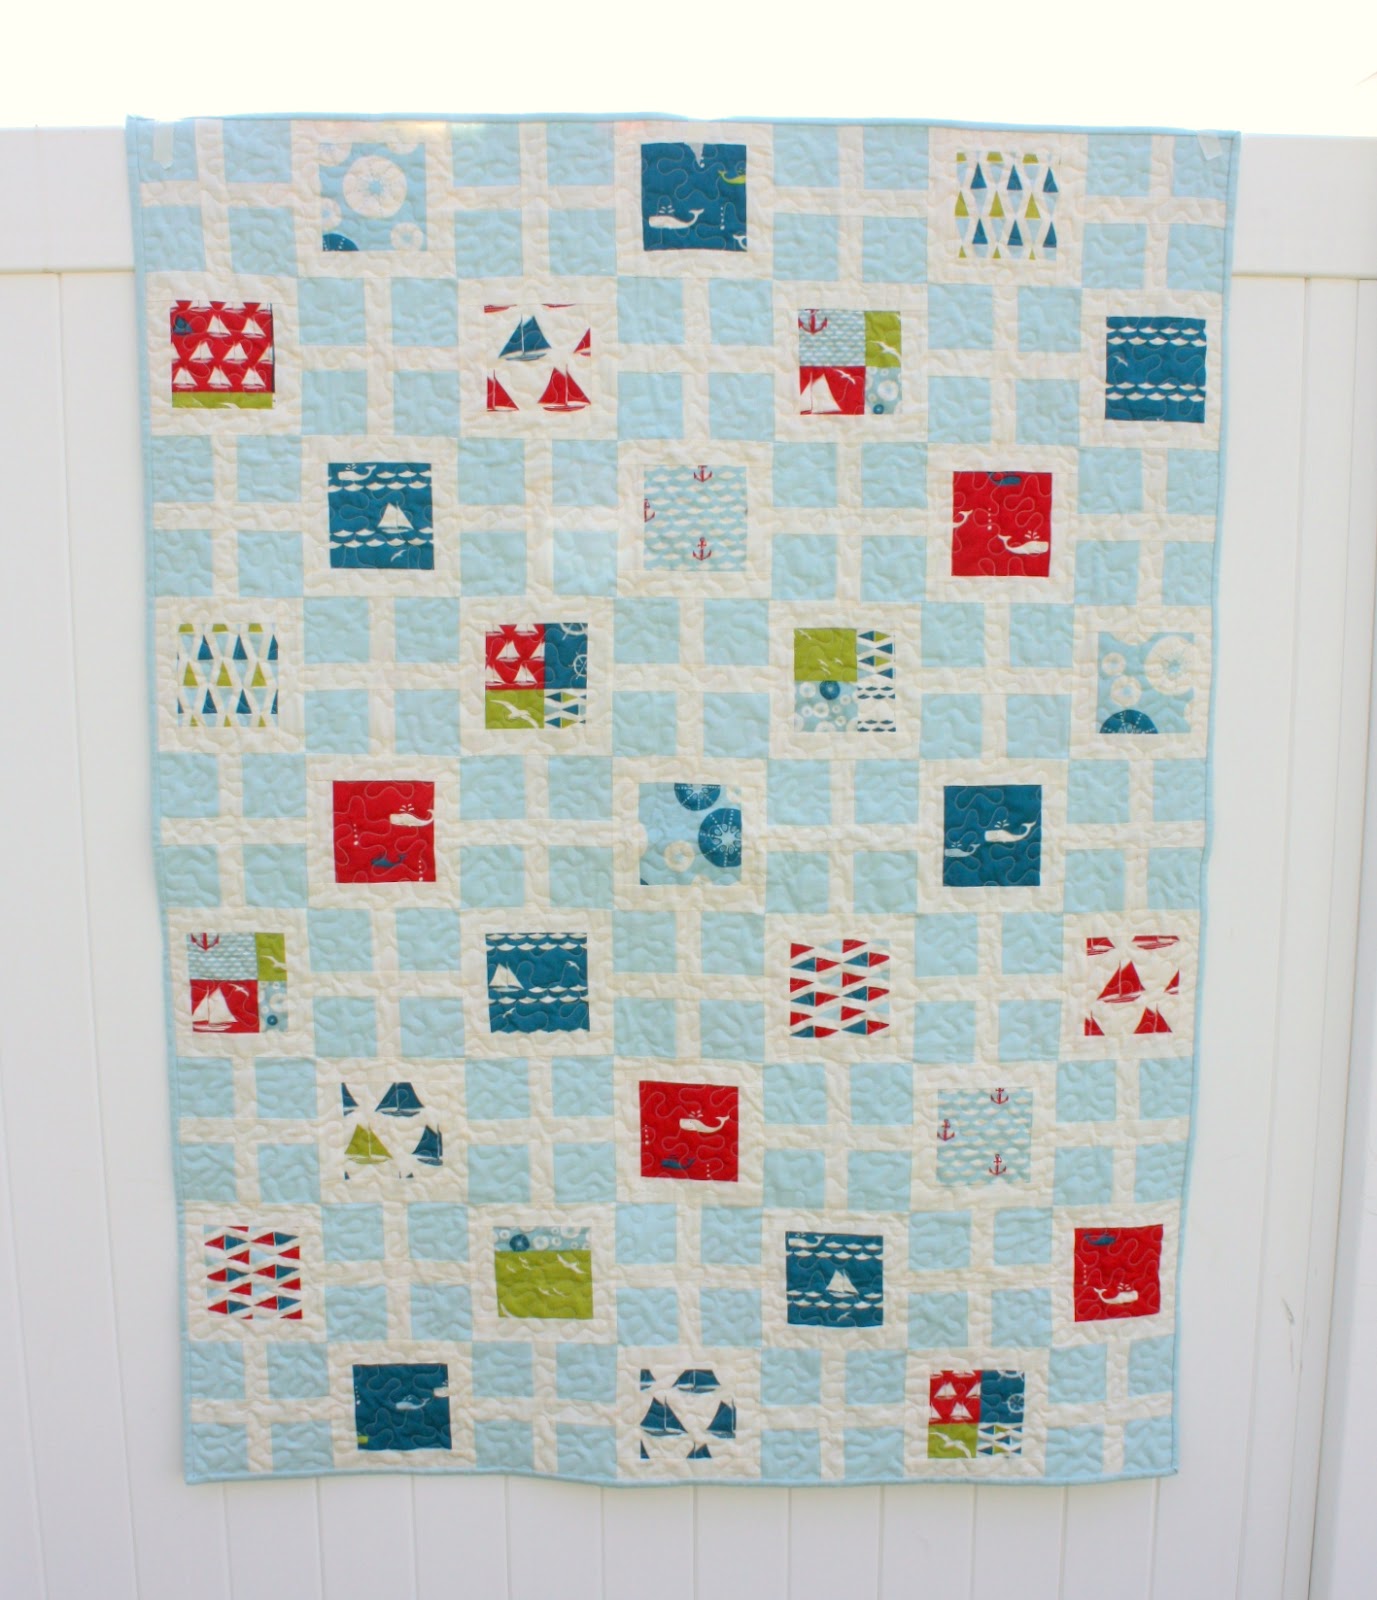 New Pattern + New Quilt: Square Knots - Diary of a Quilter - a quilt blog